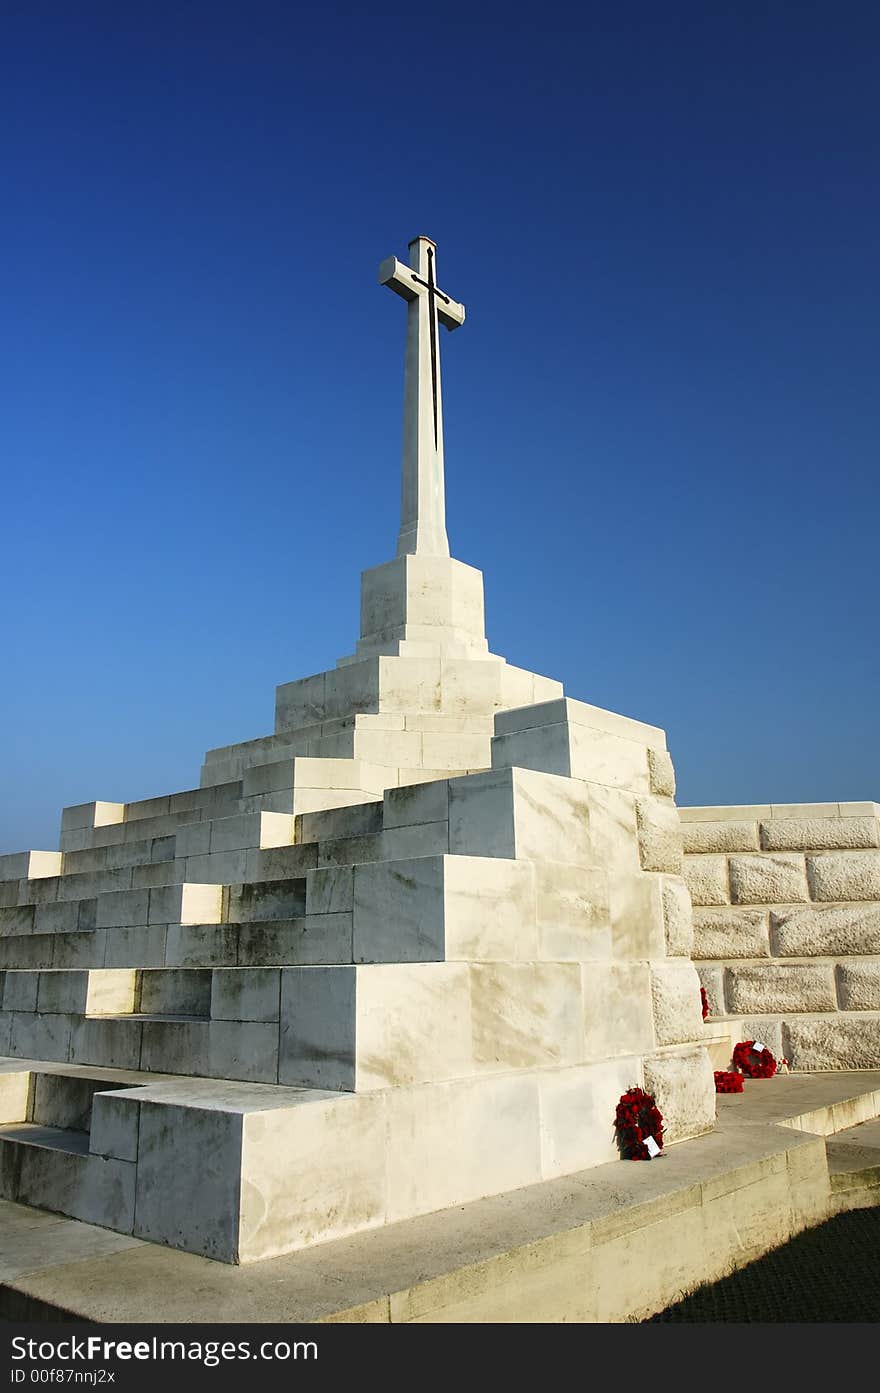 The memorial at Tyne Cot military cemetery, the largest military cemetery in continental Europe. 11'956 soldiers from the First World War are buried in it. On the rear wall are engraved the names of a further 34'957 who were killed in the last year of the war but whose bodies were never found. The memorial at Tyne Cot military cemetery, the largest military cemetery in continental Europe. 11'956 soldiers from the First World War are buried in it. On the rear wall are engraved the names of a further 34'957 who were killed in the last year of the war but whose bodies were never found.